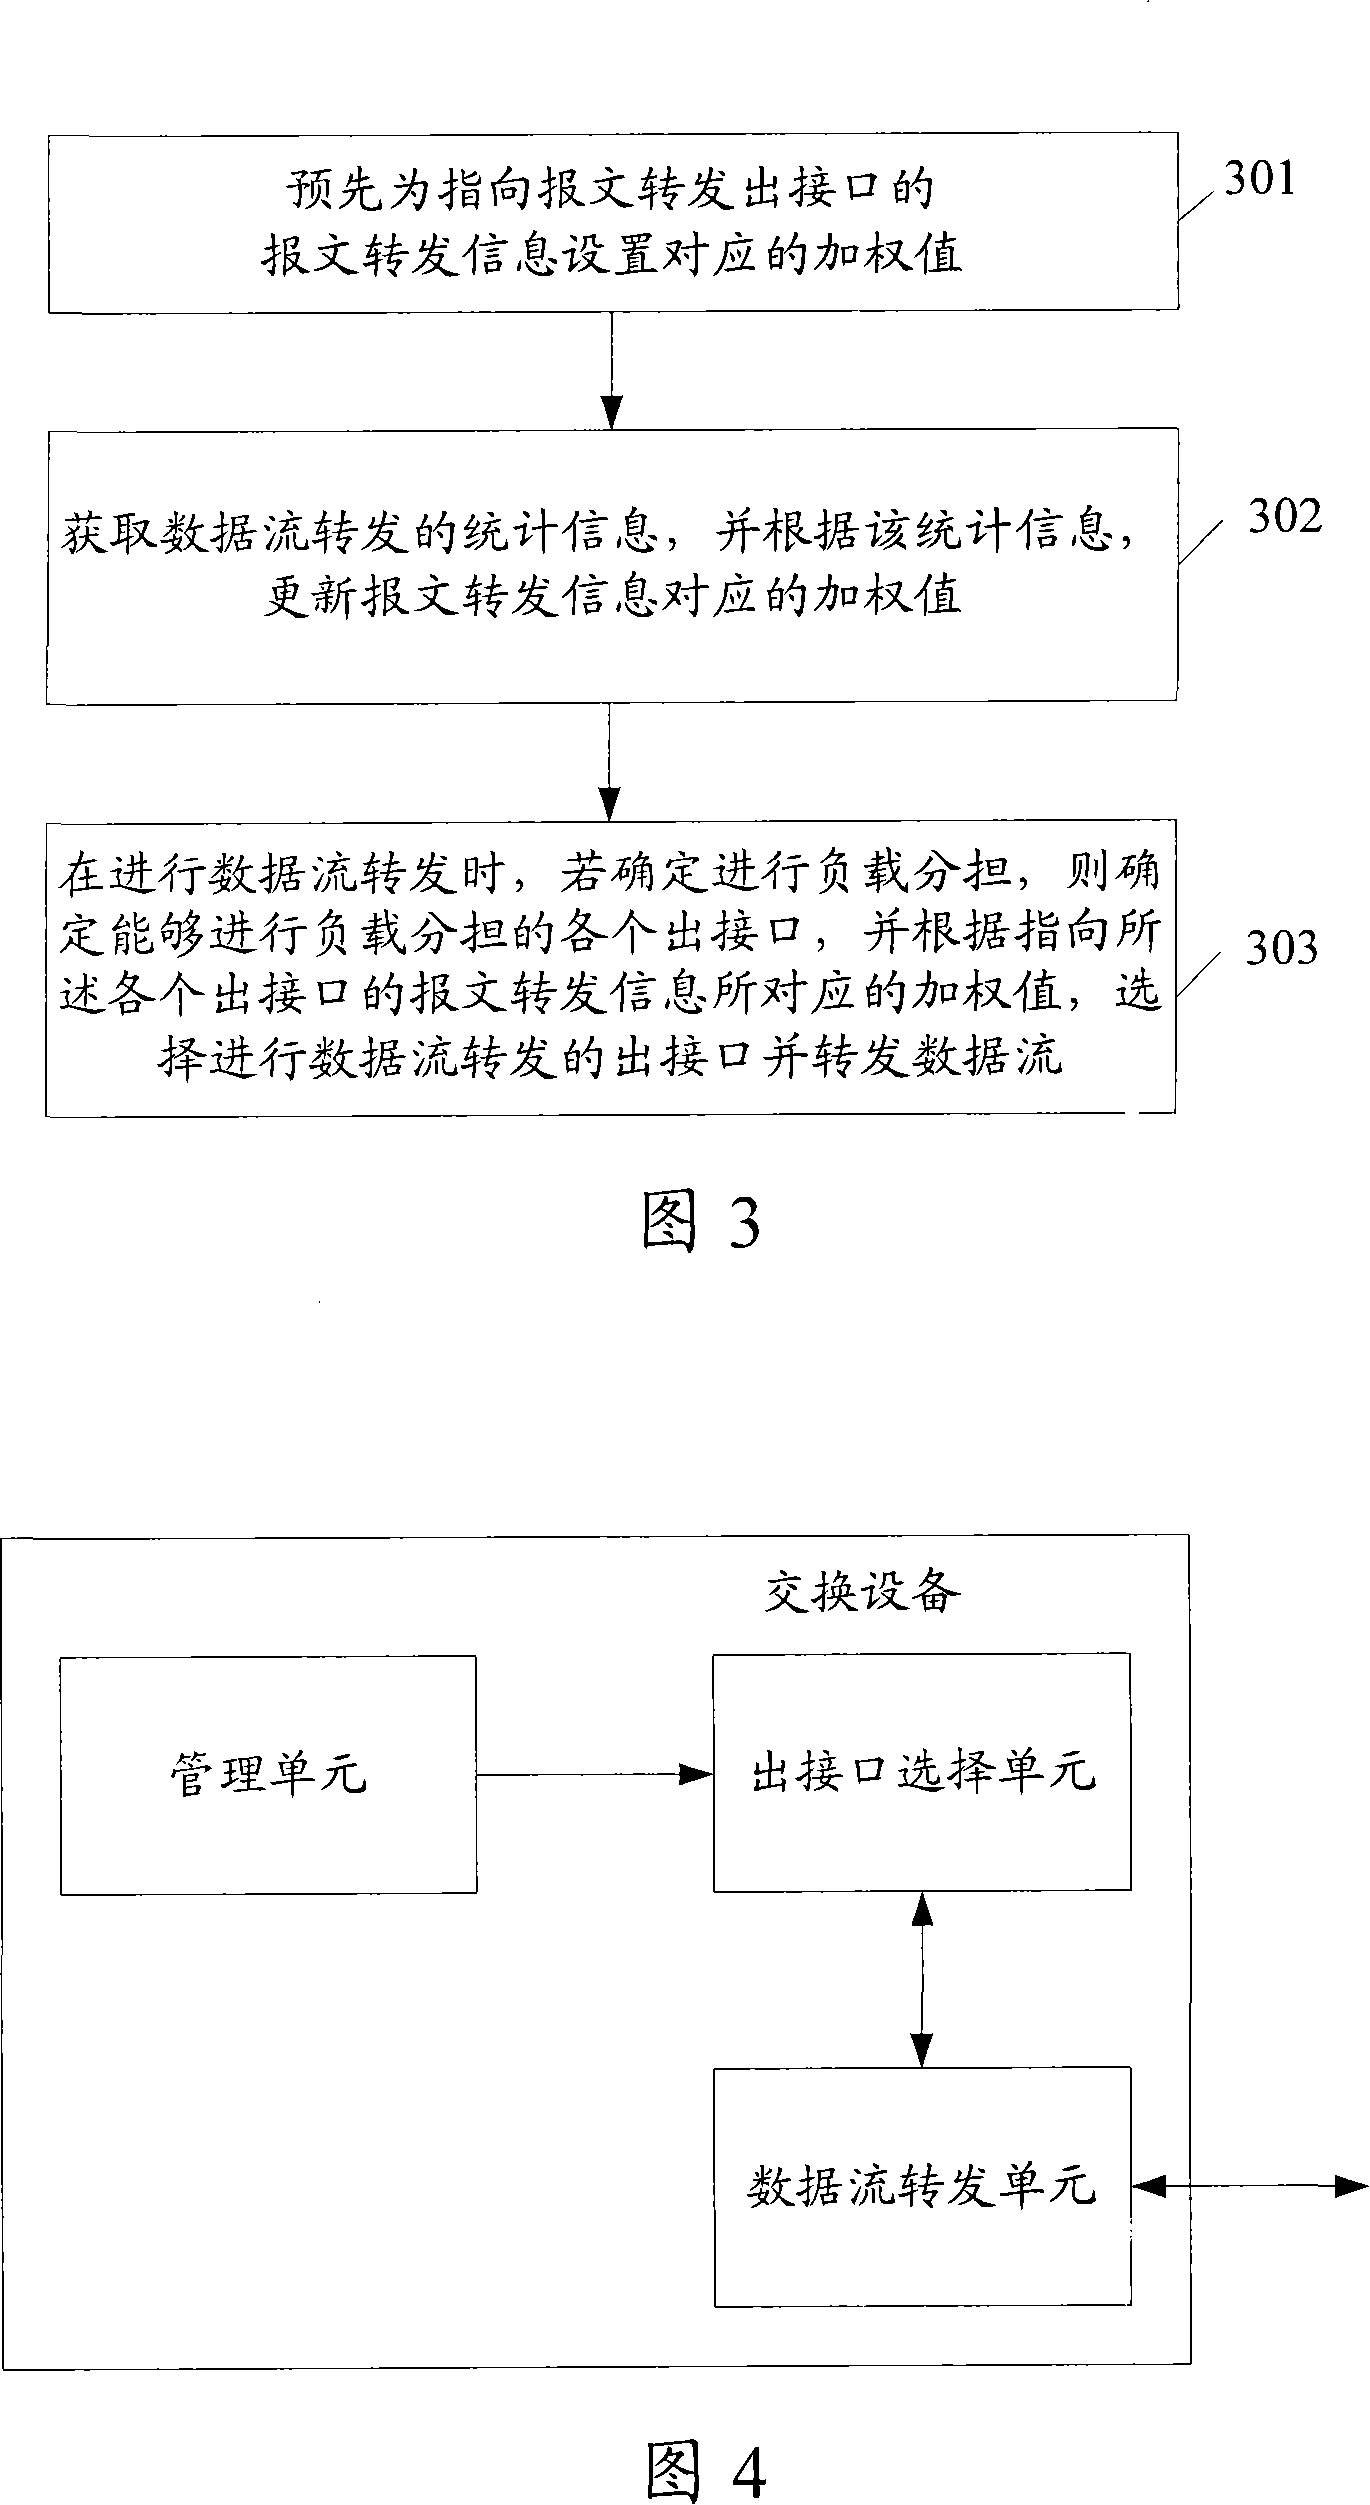 Load sharing method and equipment